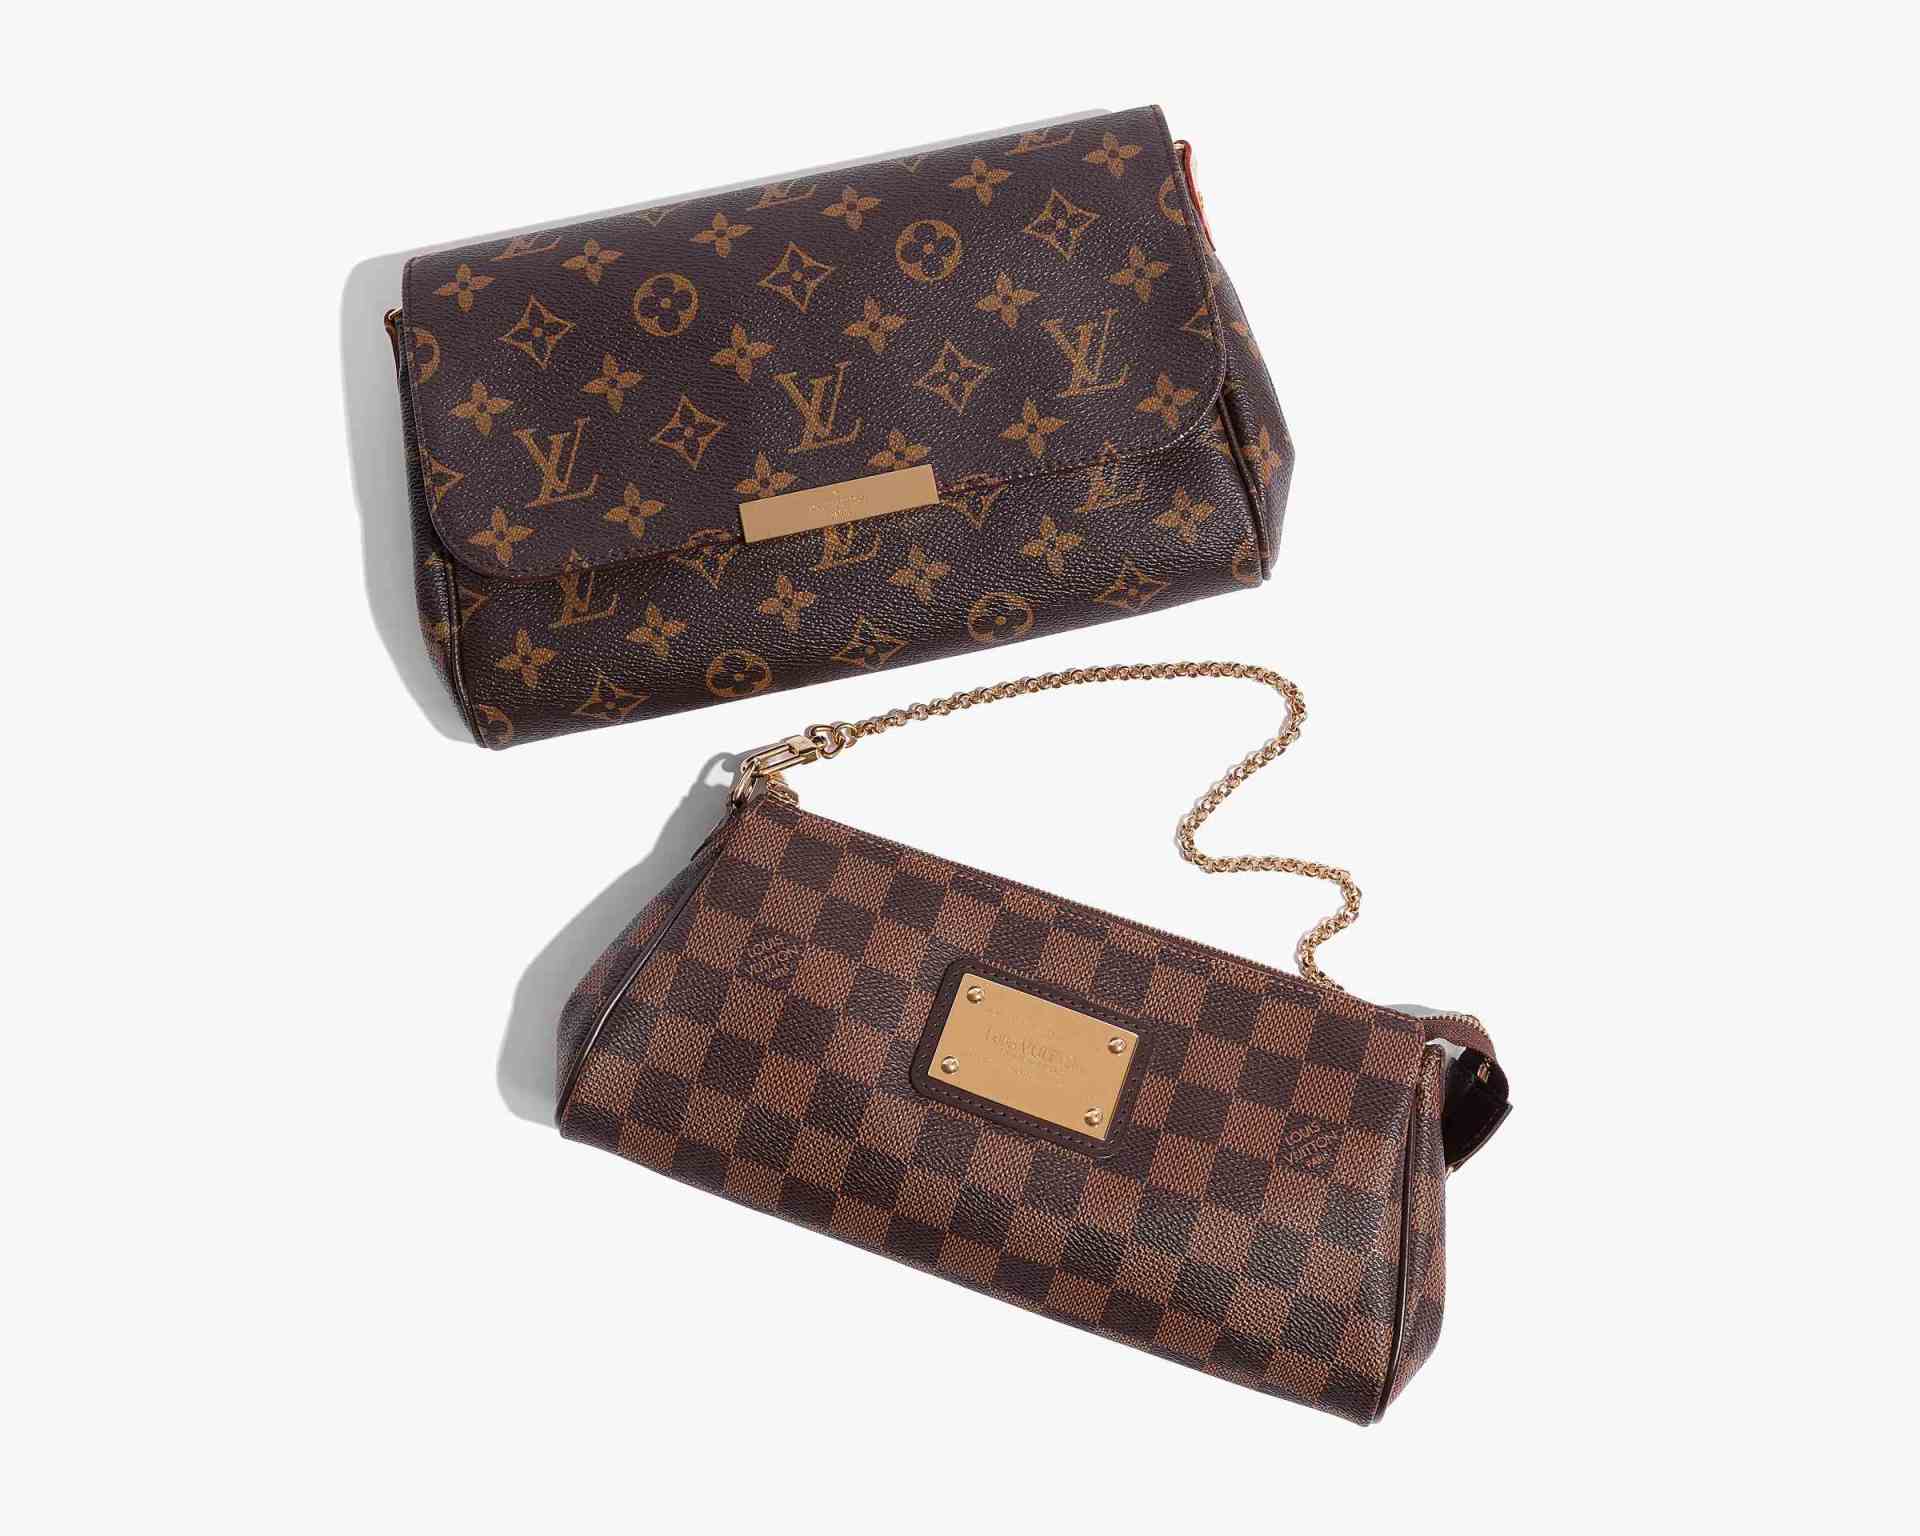 flat lay product image of louis vuitton monogram favorite mm and louis vuitton damier ebene eva clutch bags at FASHIONPHILE